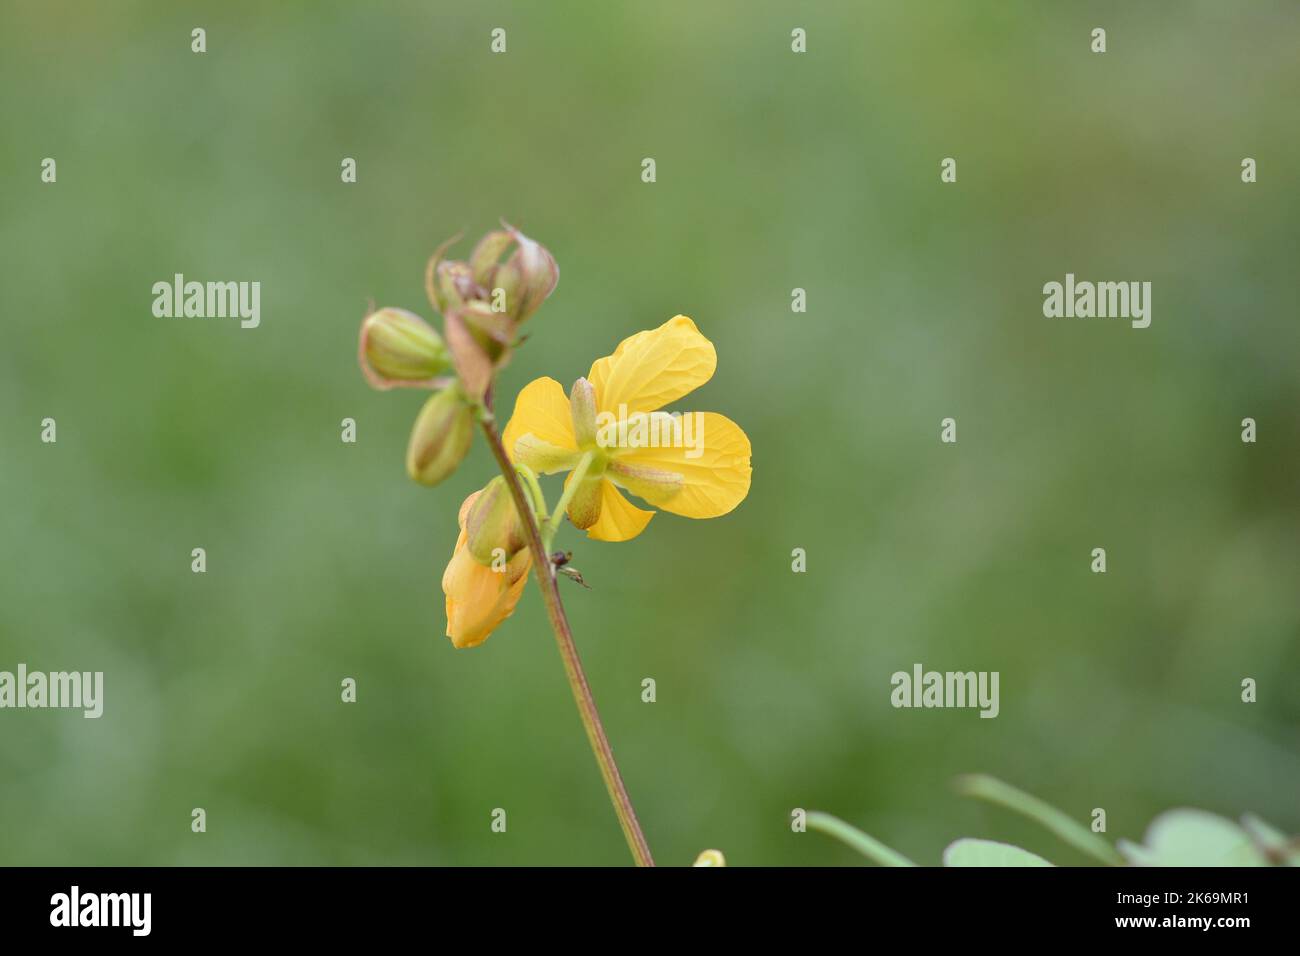 A closeup shot of a Senna occidentalis plant against a green blurred background Stock Photo